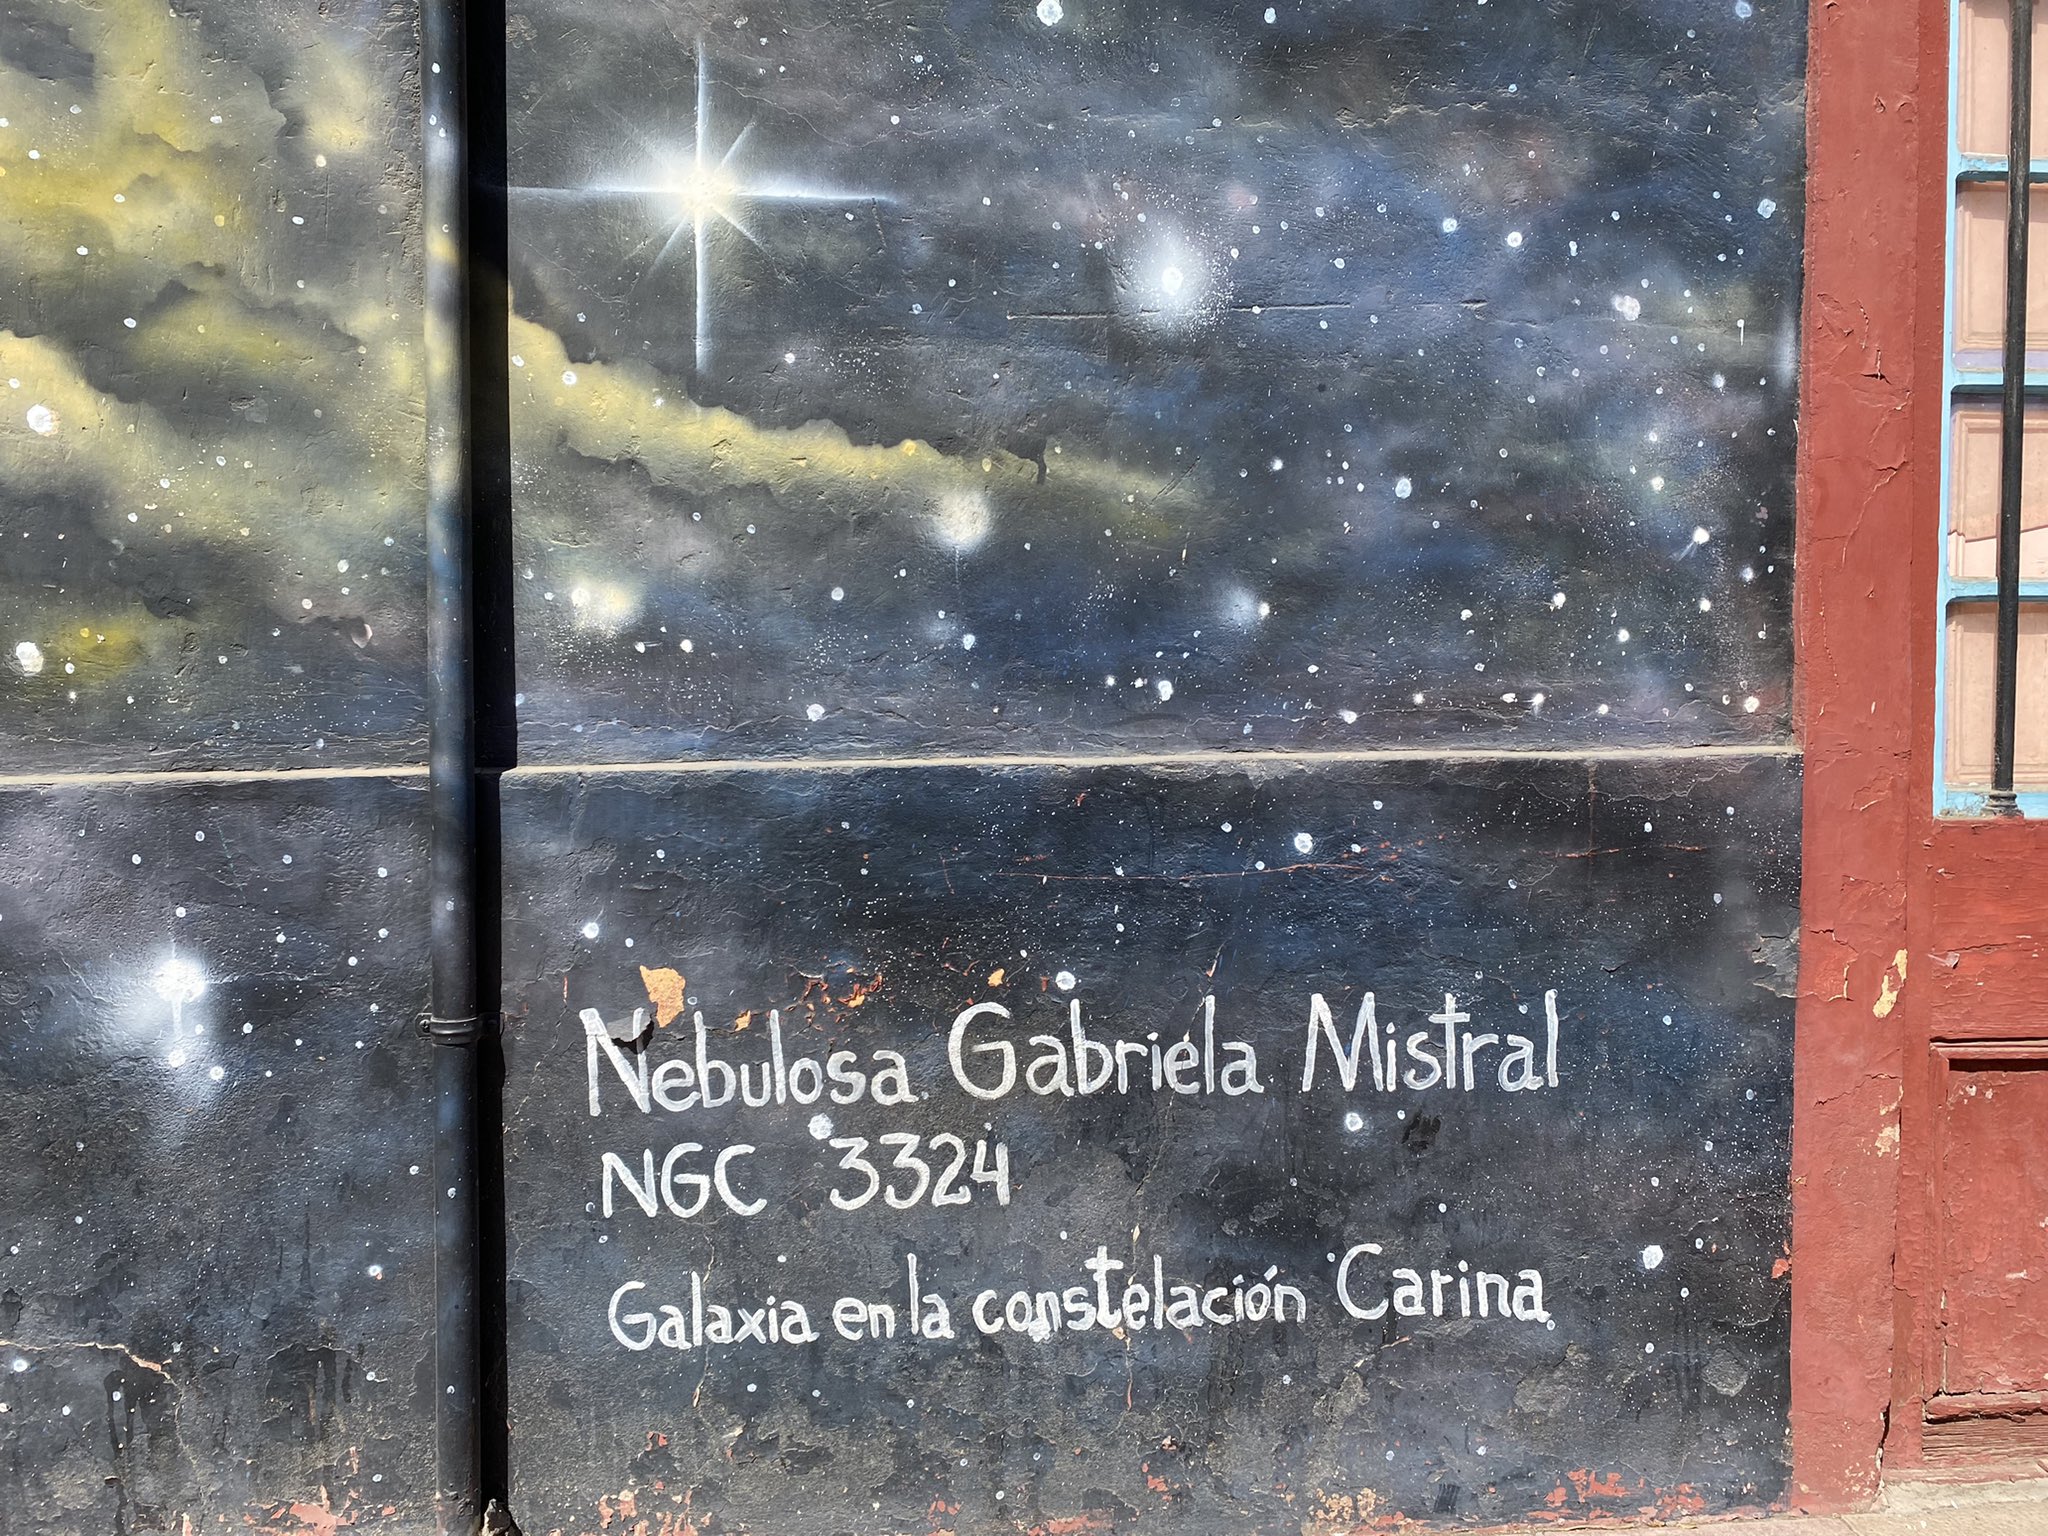 Ana Sanchez And Now Some Culture While In Vicuna Mandatory Visit To Gabriela Mistral Museum She Was Born In Vicuna But Travelled The World Promoting Literature Education As Well